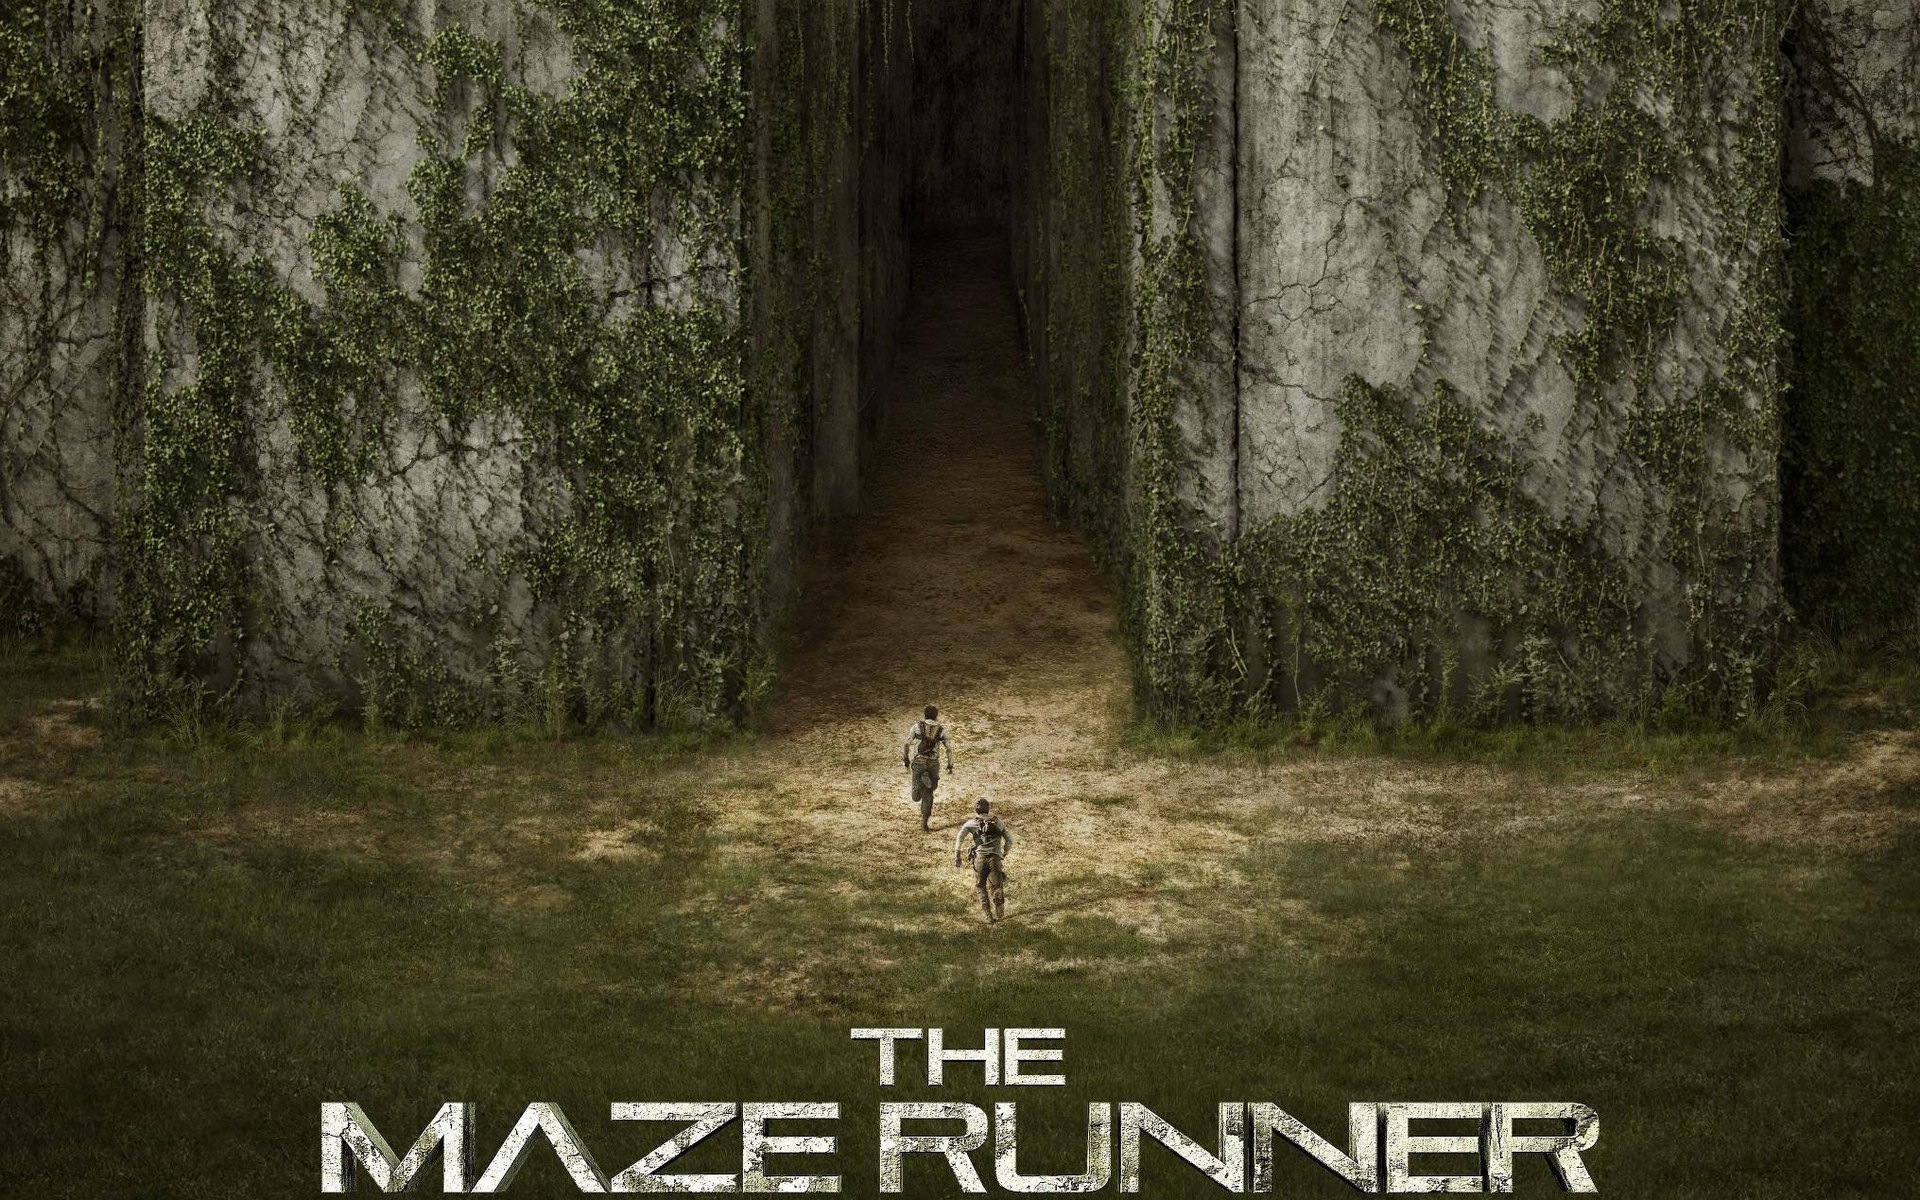 The Maze Runner HD movie wallpapers #5 - 1920x1200